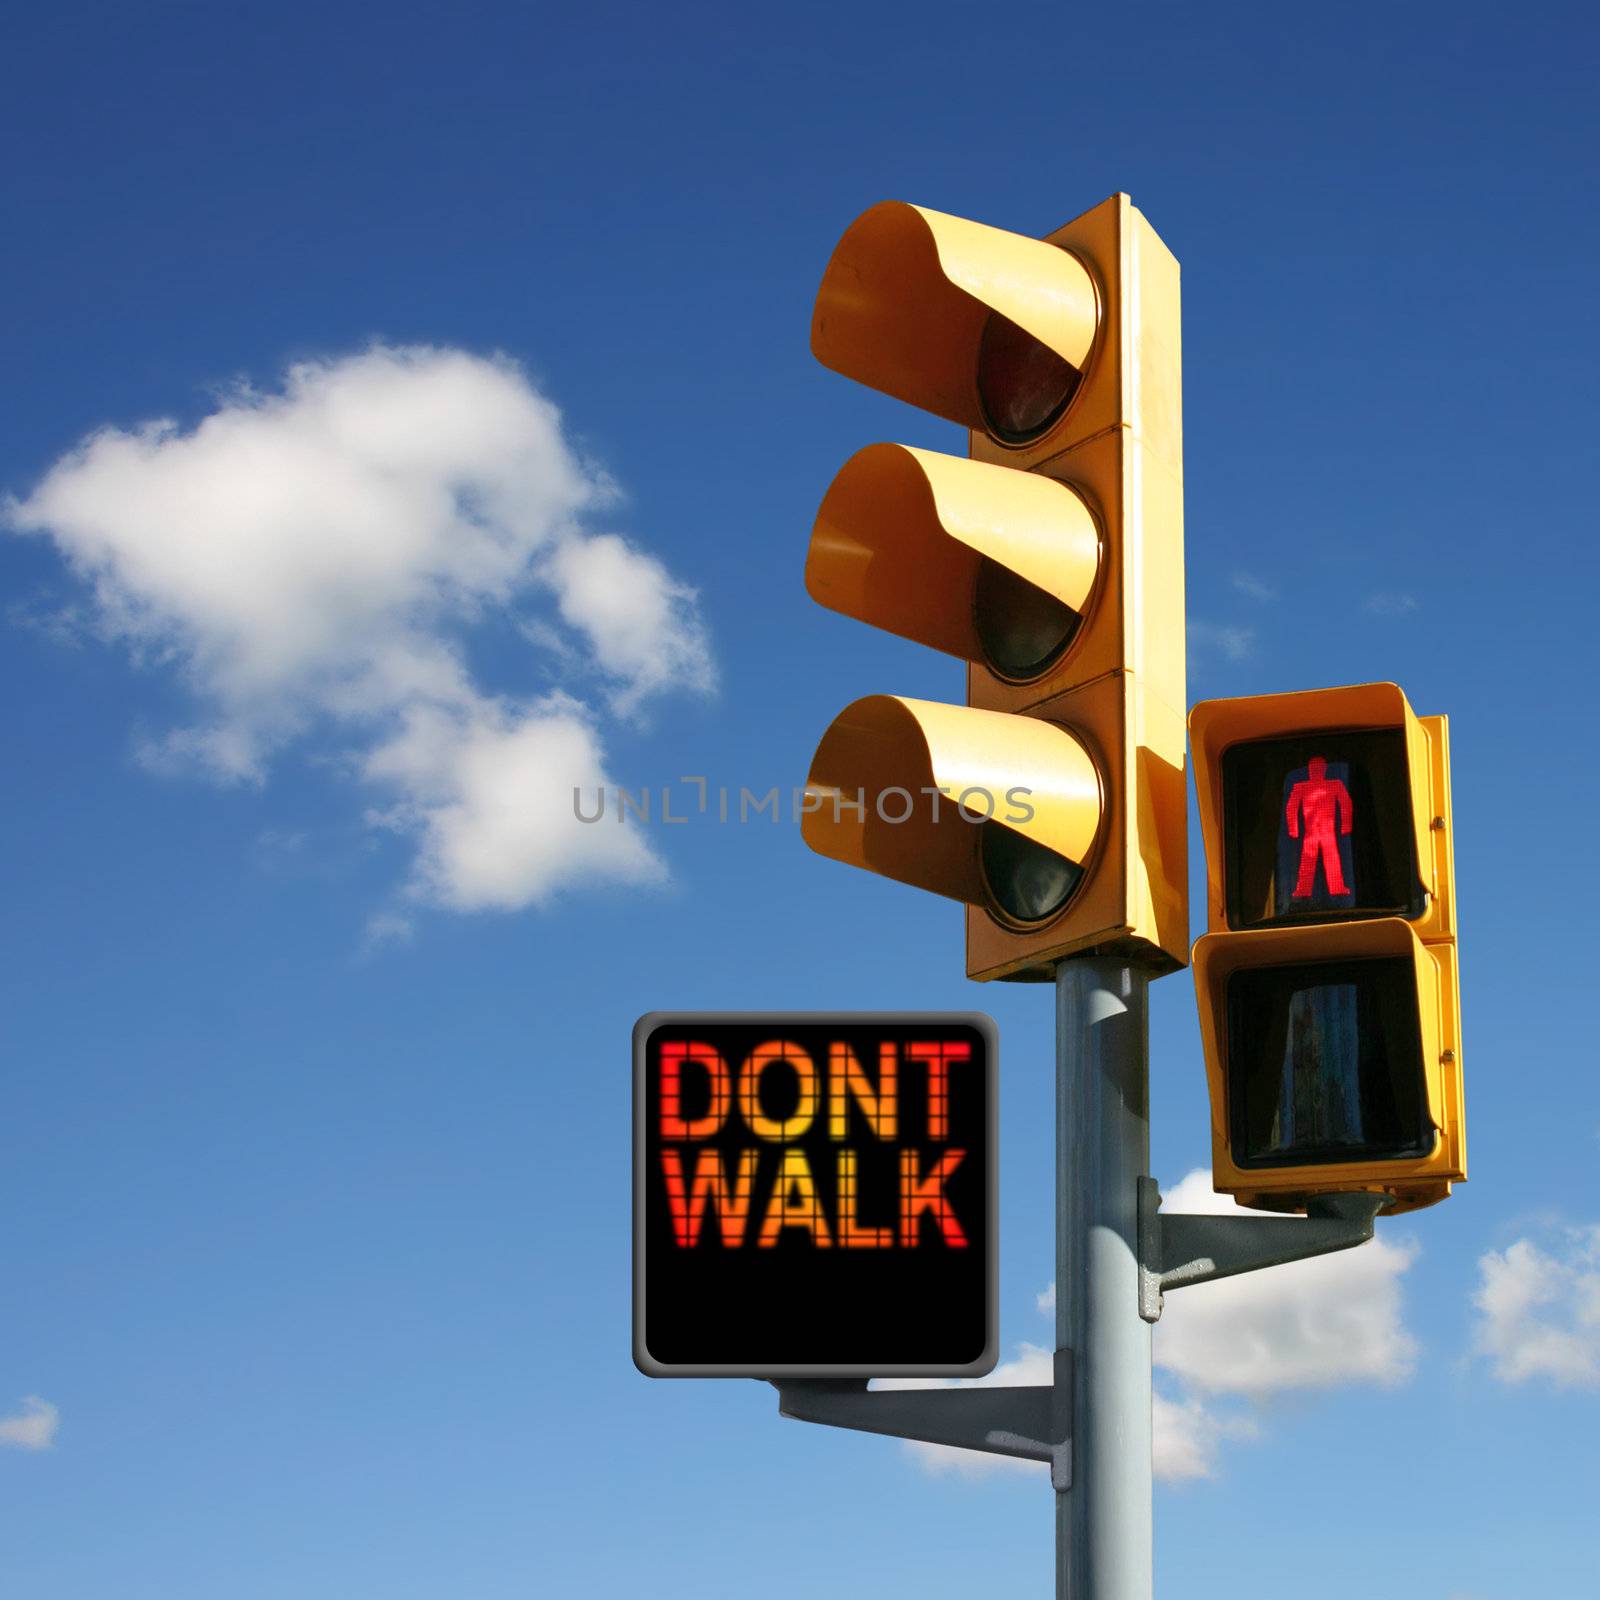 Traffic Lights with Don't Walk and Red Man